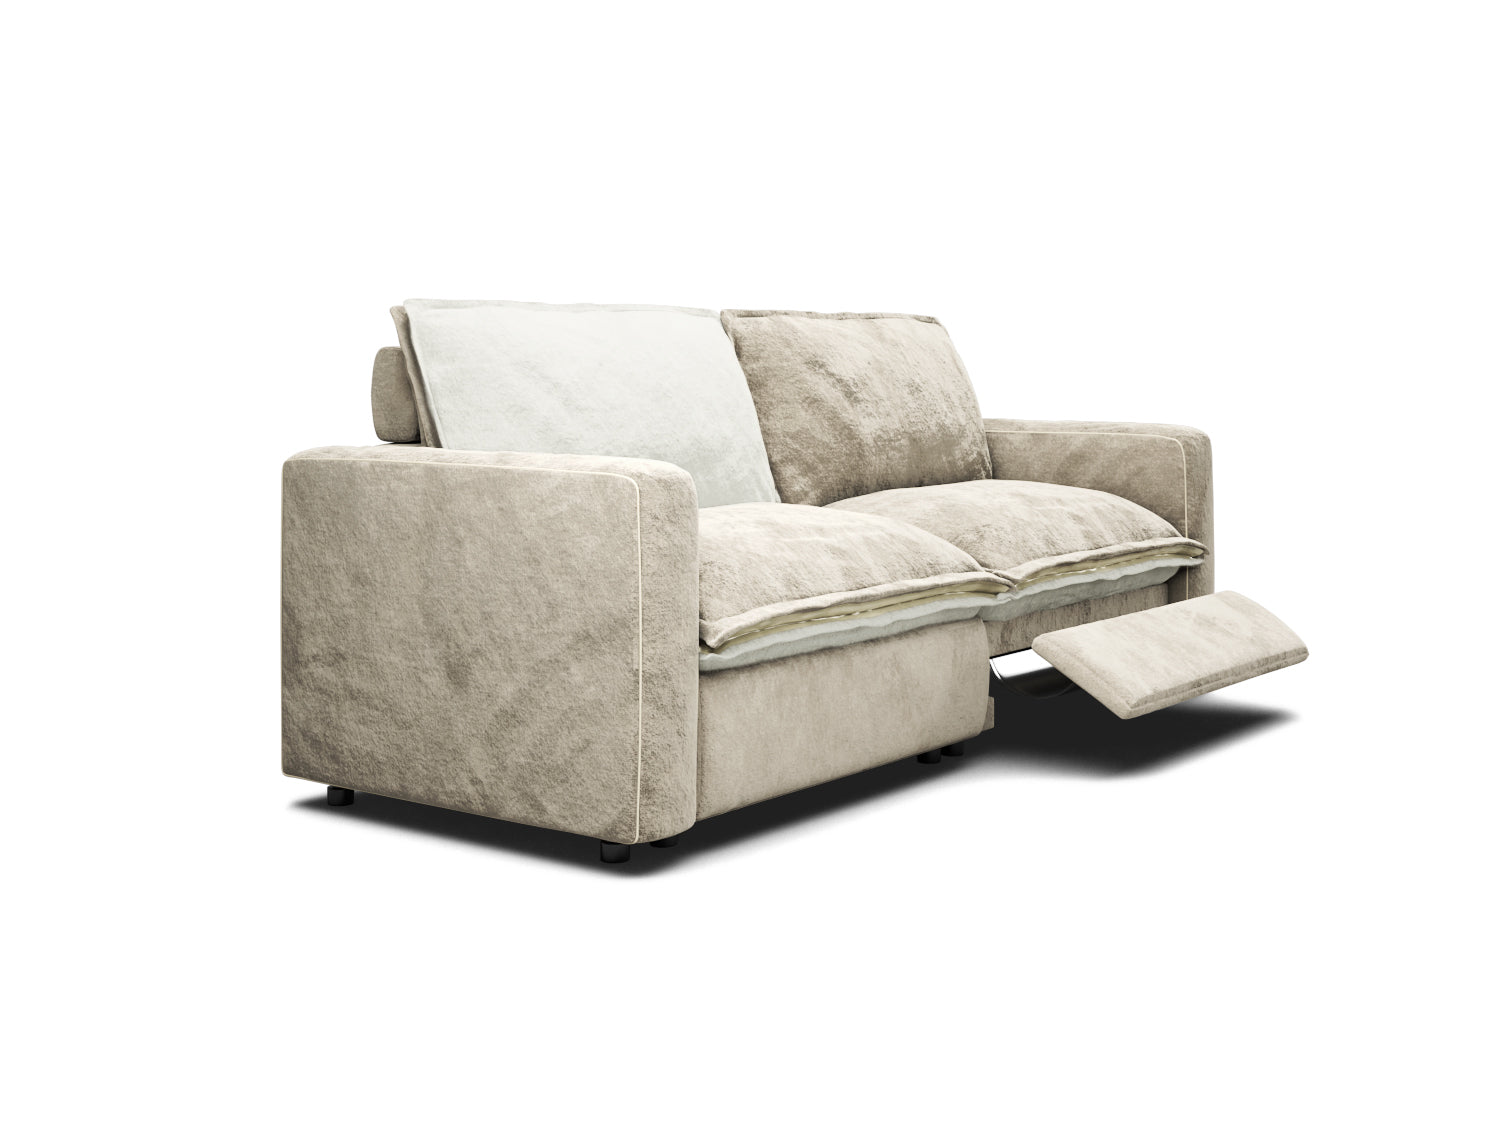 Reclining two-tone sectional loveseat in beige and white velvet, modular